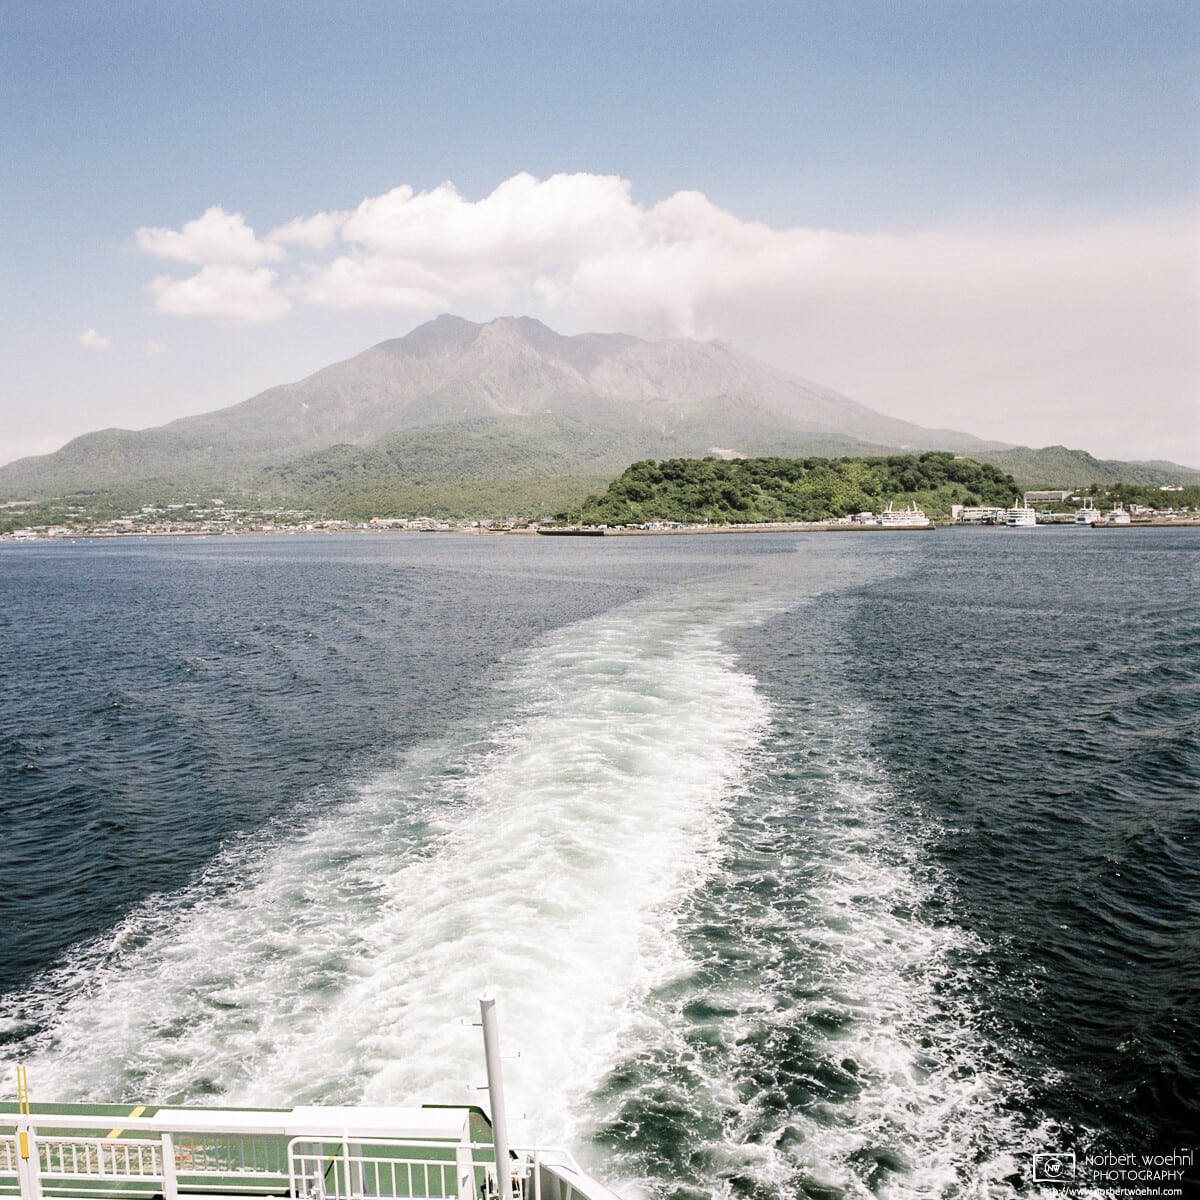 A photo from the ferry passage back from the Sakurajima volcano in Kagoshima Prefecture, Japan.